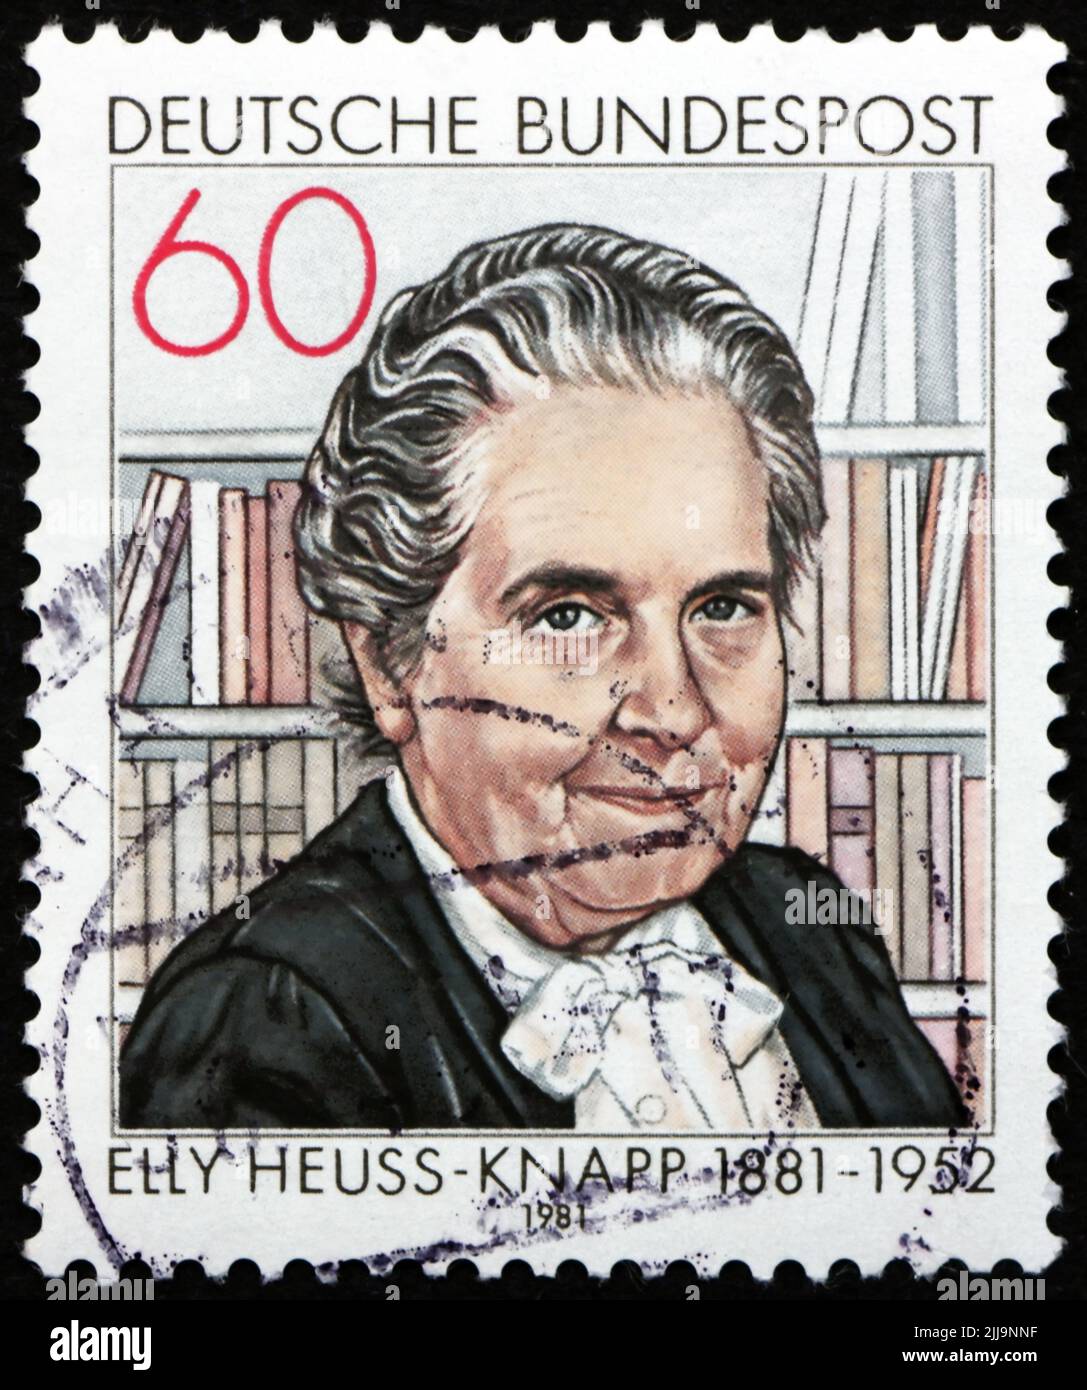 GERMANY - CIRCA 1981: a stamp printed in Germany shows Elly Heuss-Knapp (1881-1951), founded Elly Heuss-Knapp Foundation, Rest and Recuperation for Mo Stock Photo